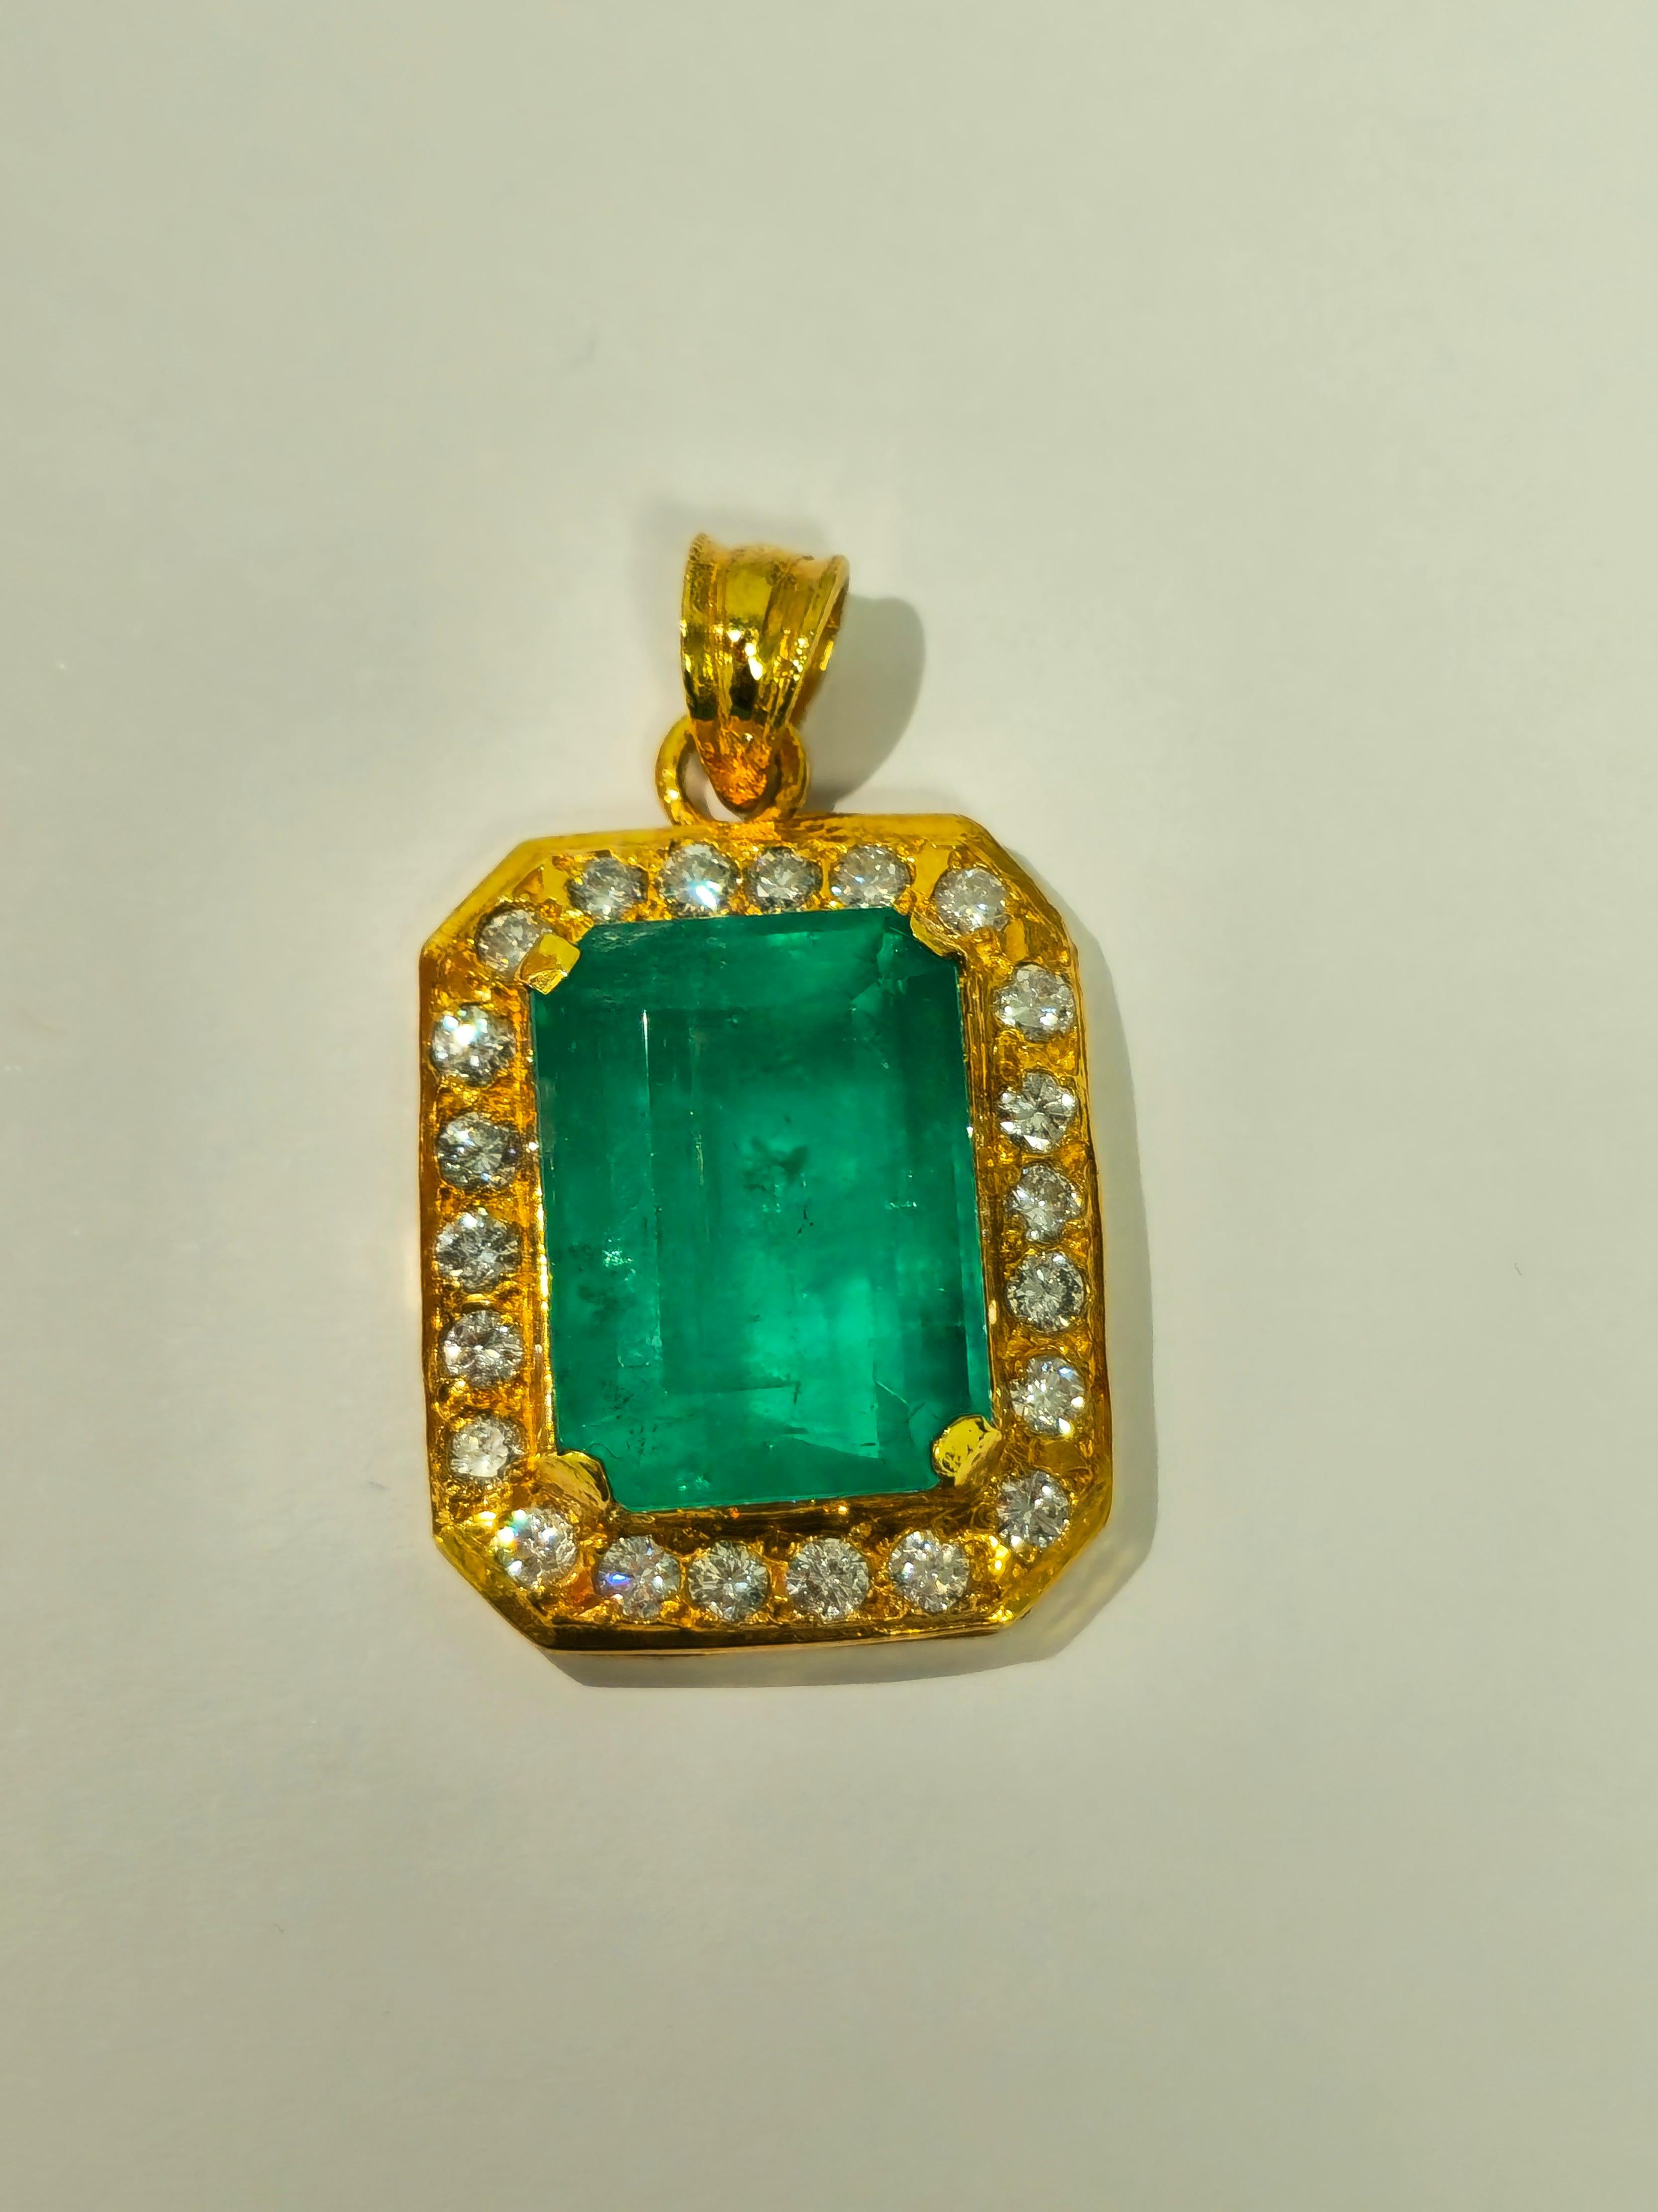 Cast in luxurious 21K yellow gold, this pendant is a showcase of opulence. Anchoring its allure is a breathtaking 17.00-carat Colombian emerald, sourced directly from the earth, and masterfully cut in an emerald shape. Accentuating its splendor are